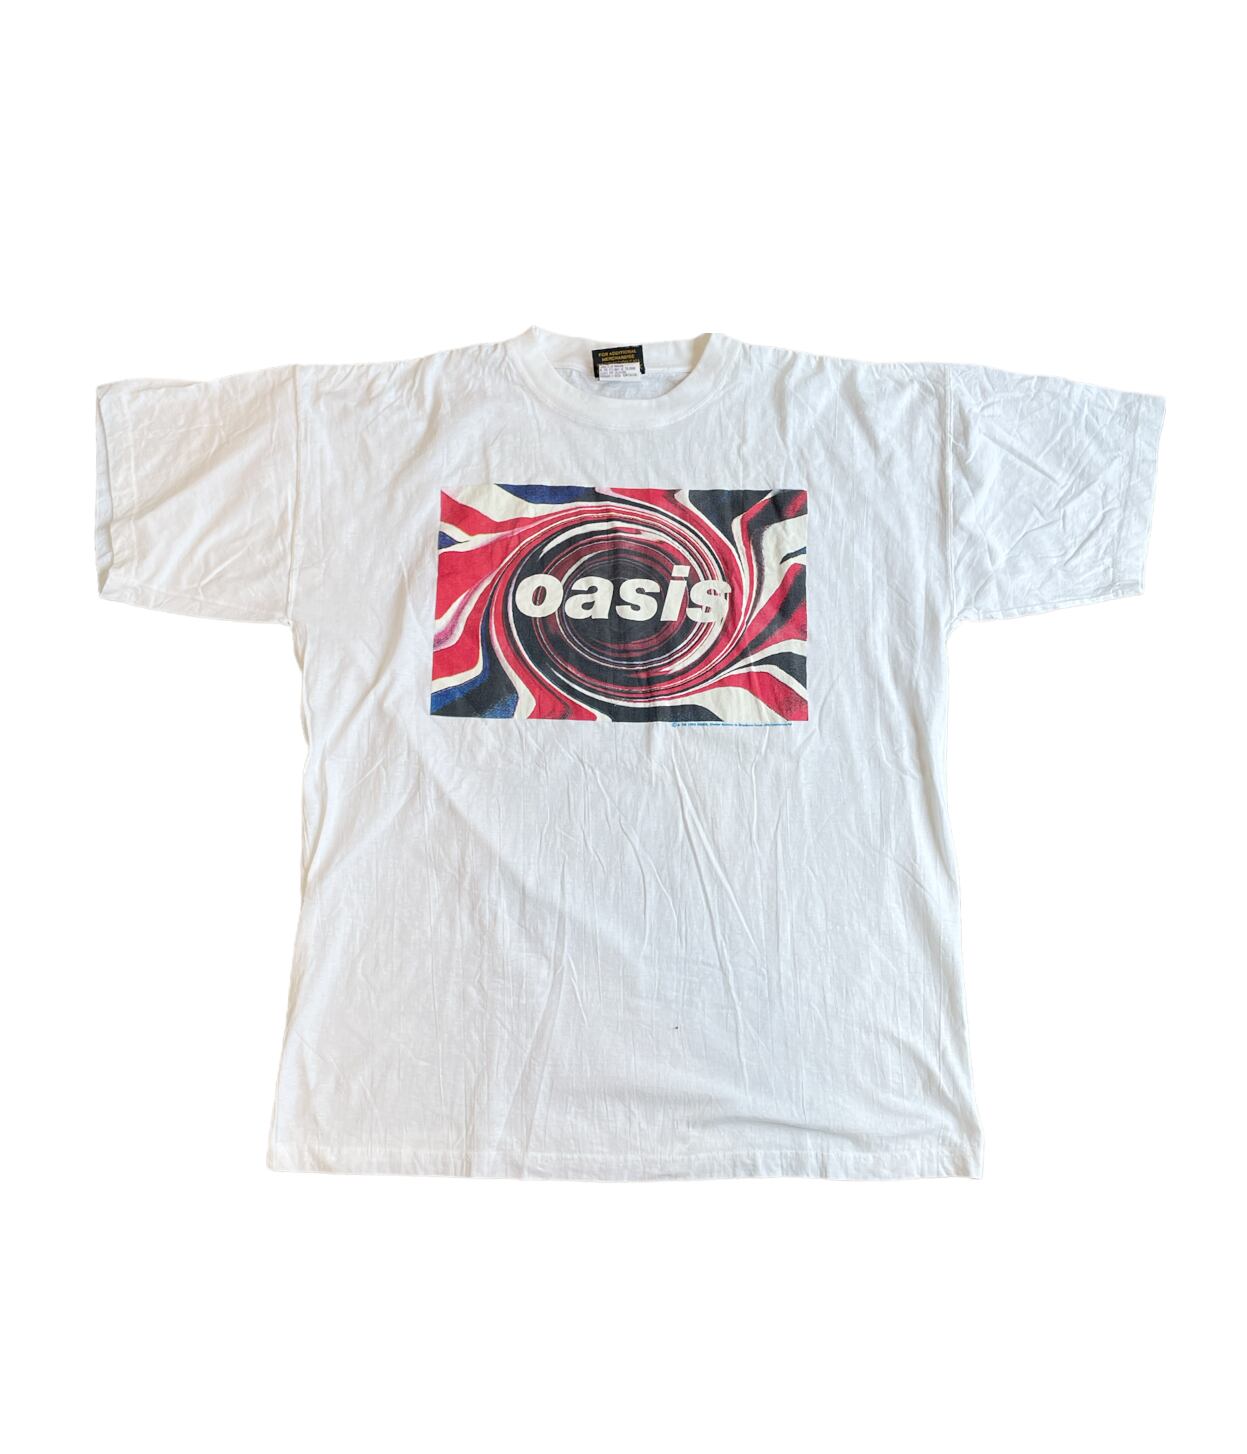 90s vintage oasis Tシャツ - トップス